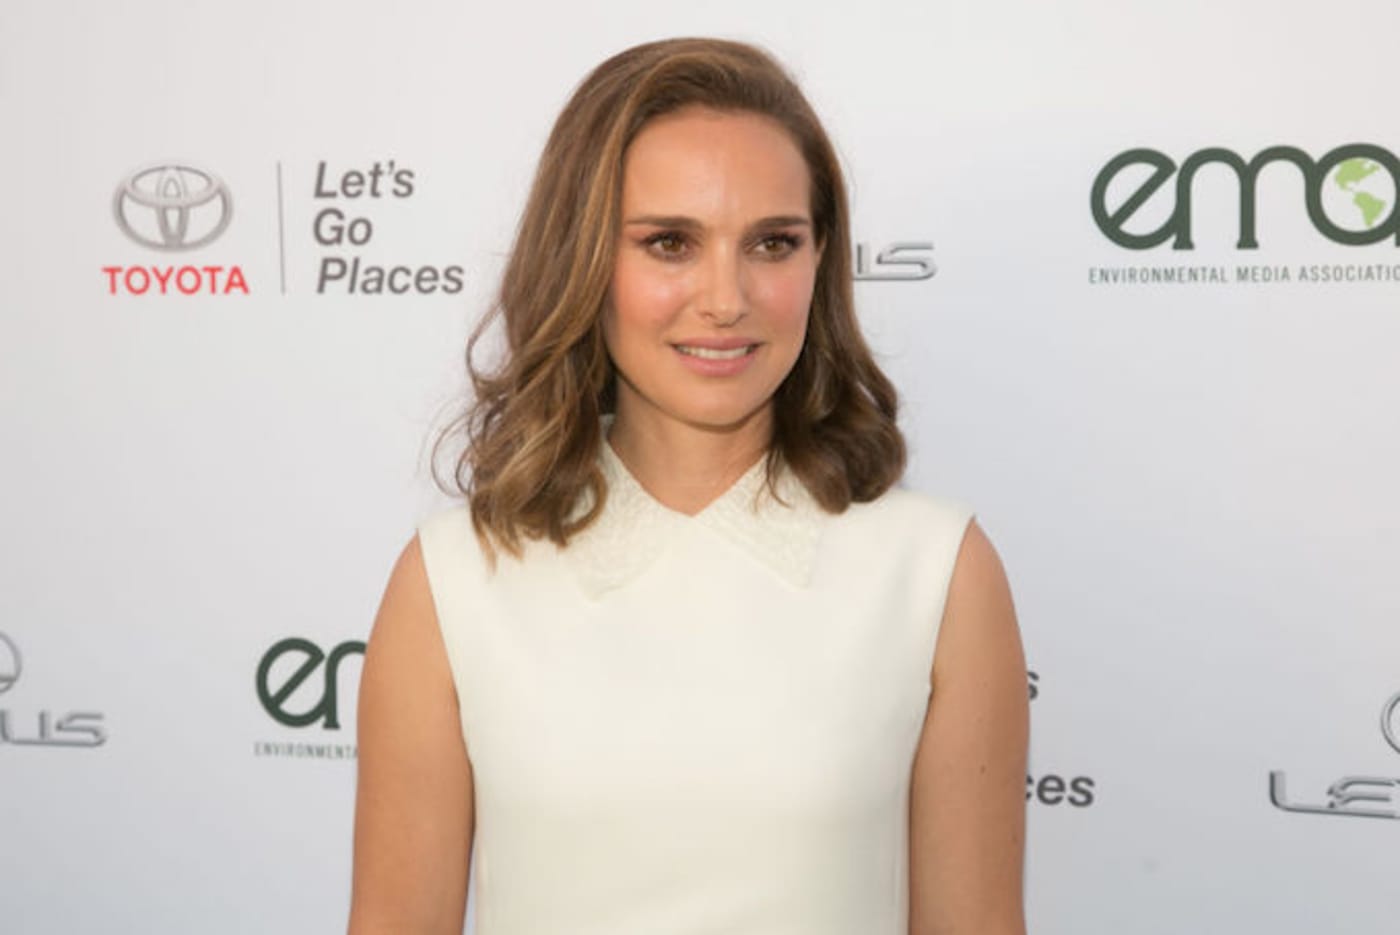 This is a picture of Natalie Portman